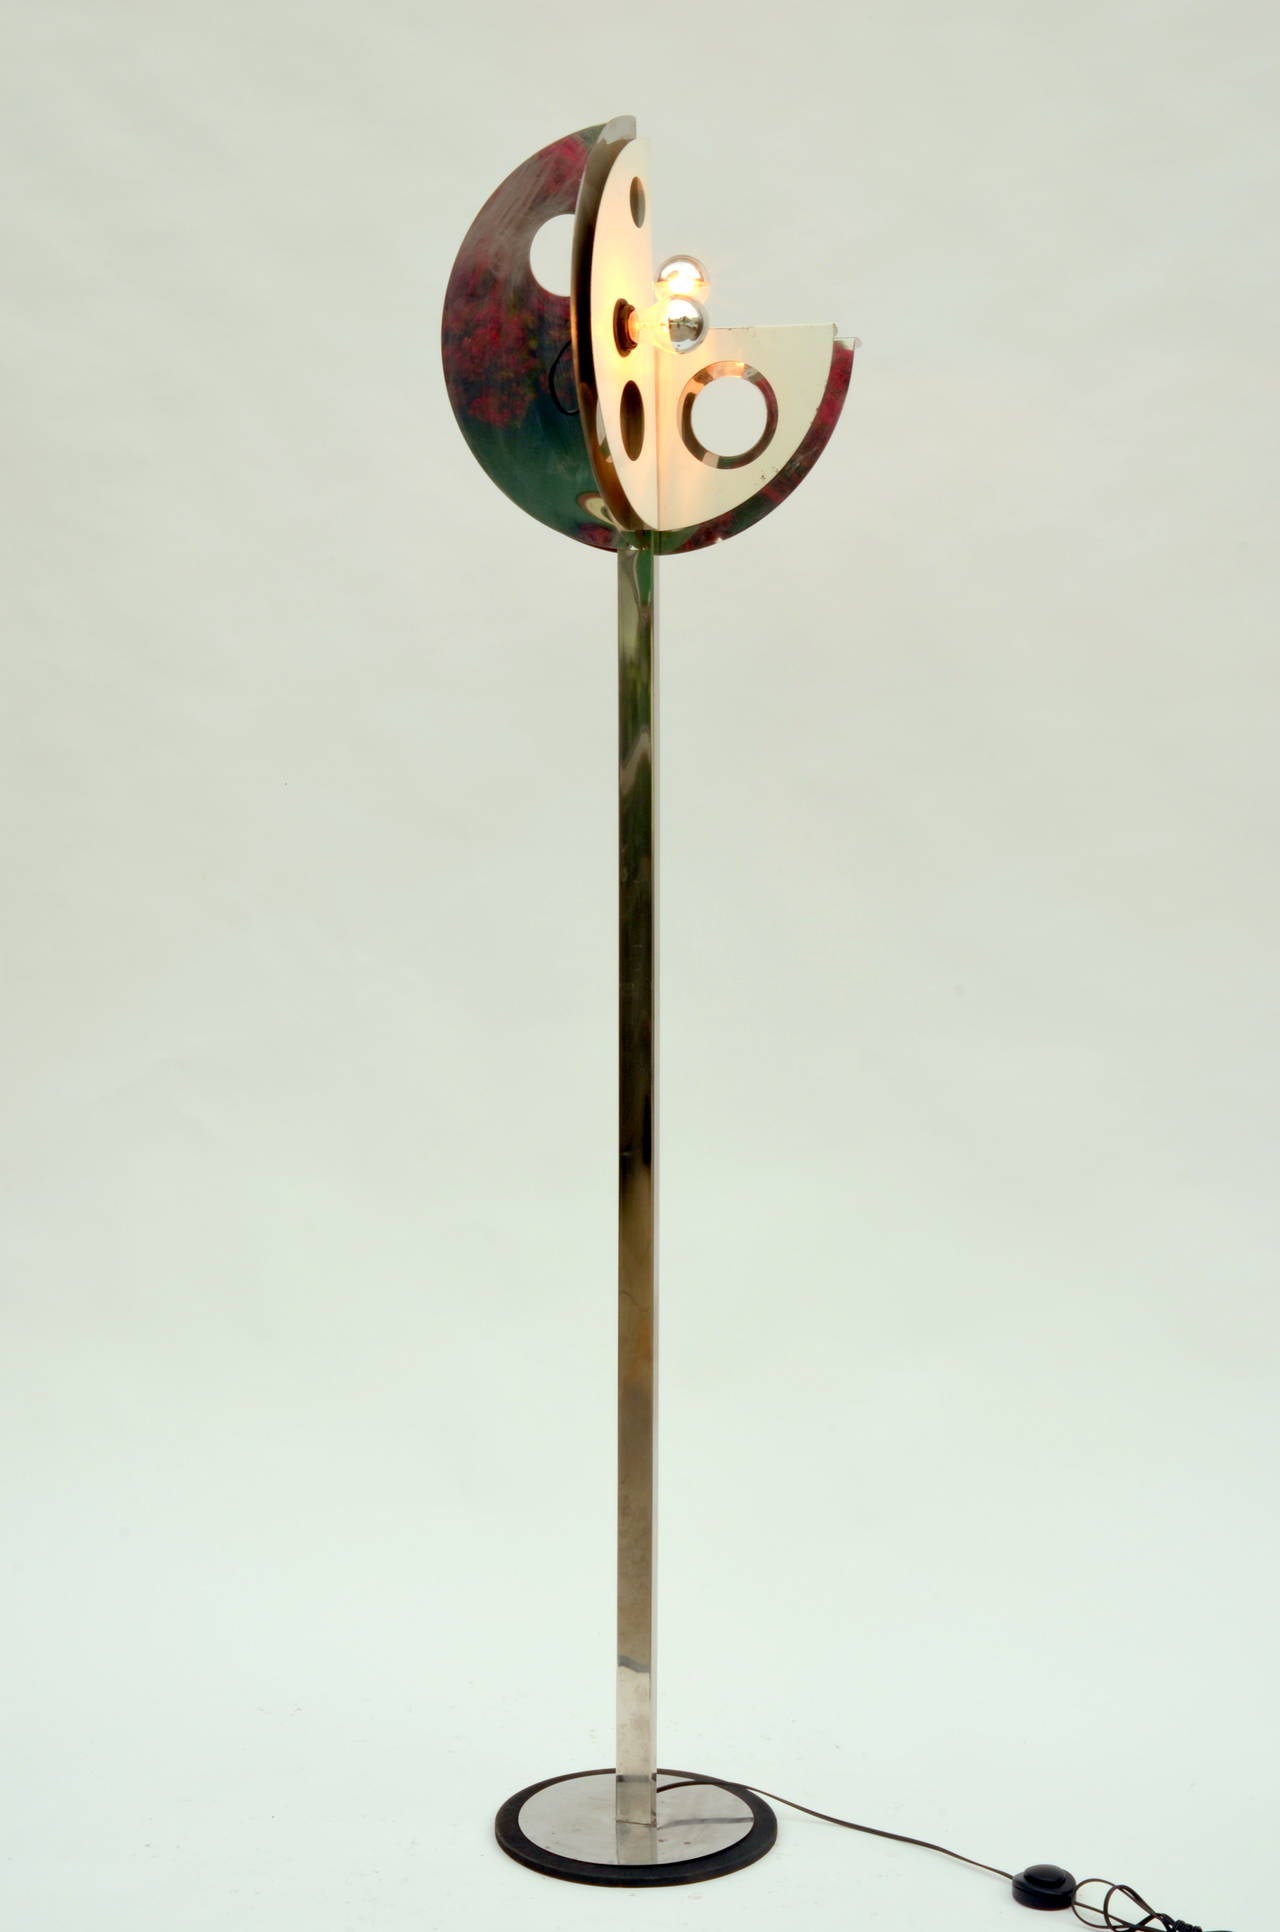 Unusual 70's Floor Lamp in the style of Yonel Lebovici.